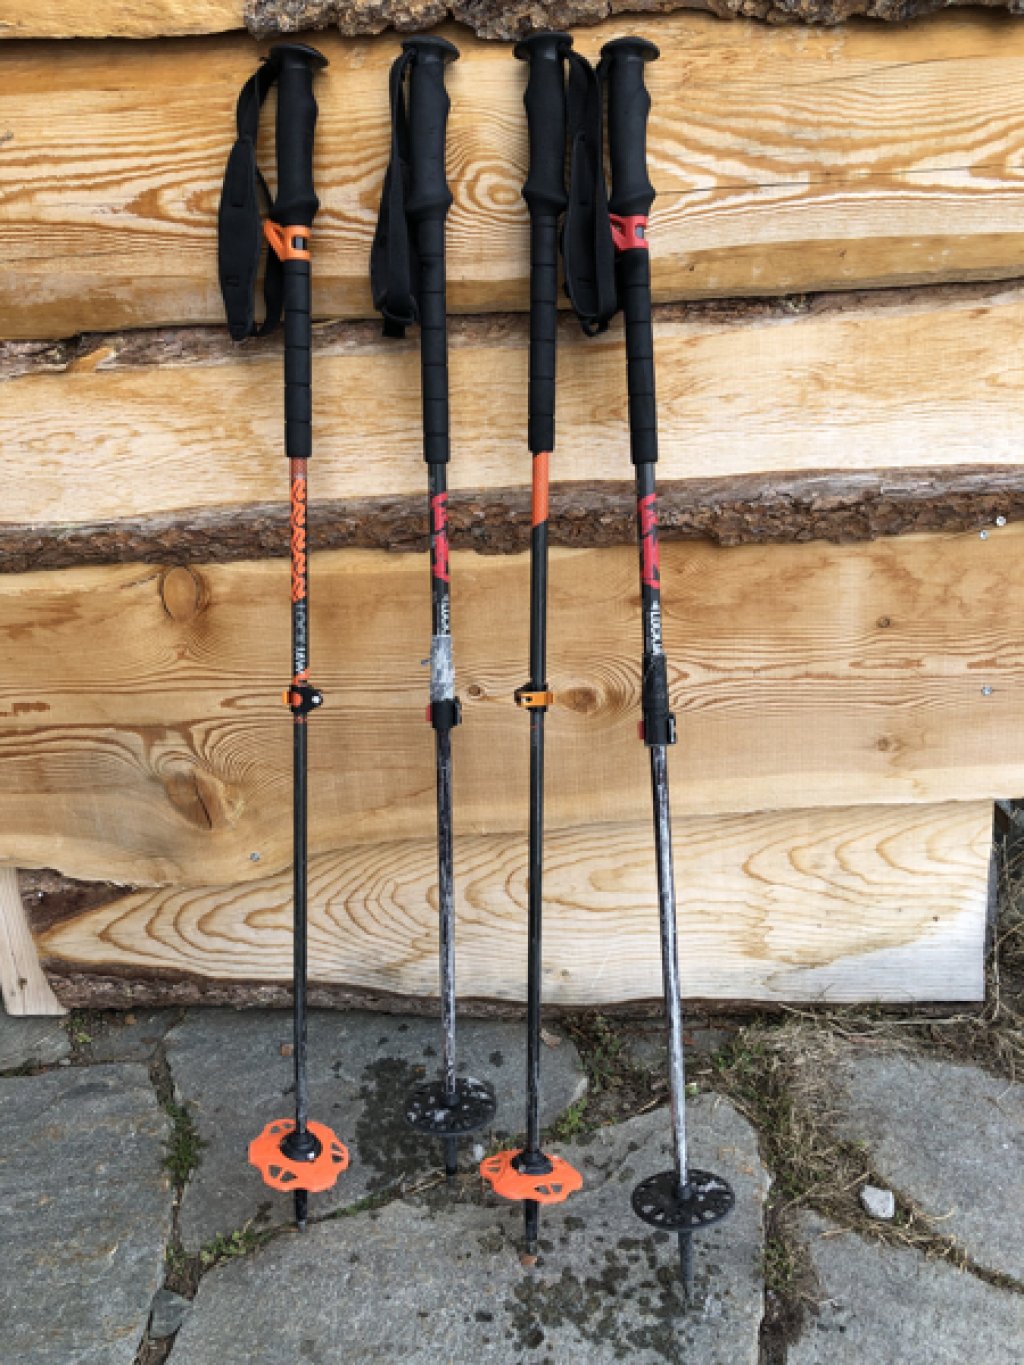 K2 Lockjaw Carbon Plus Pole, old and new